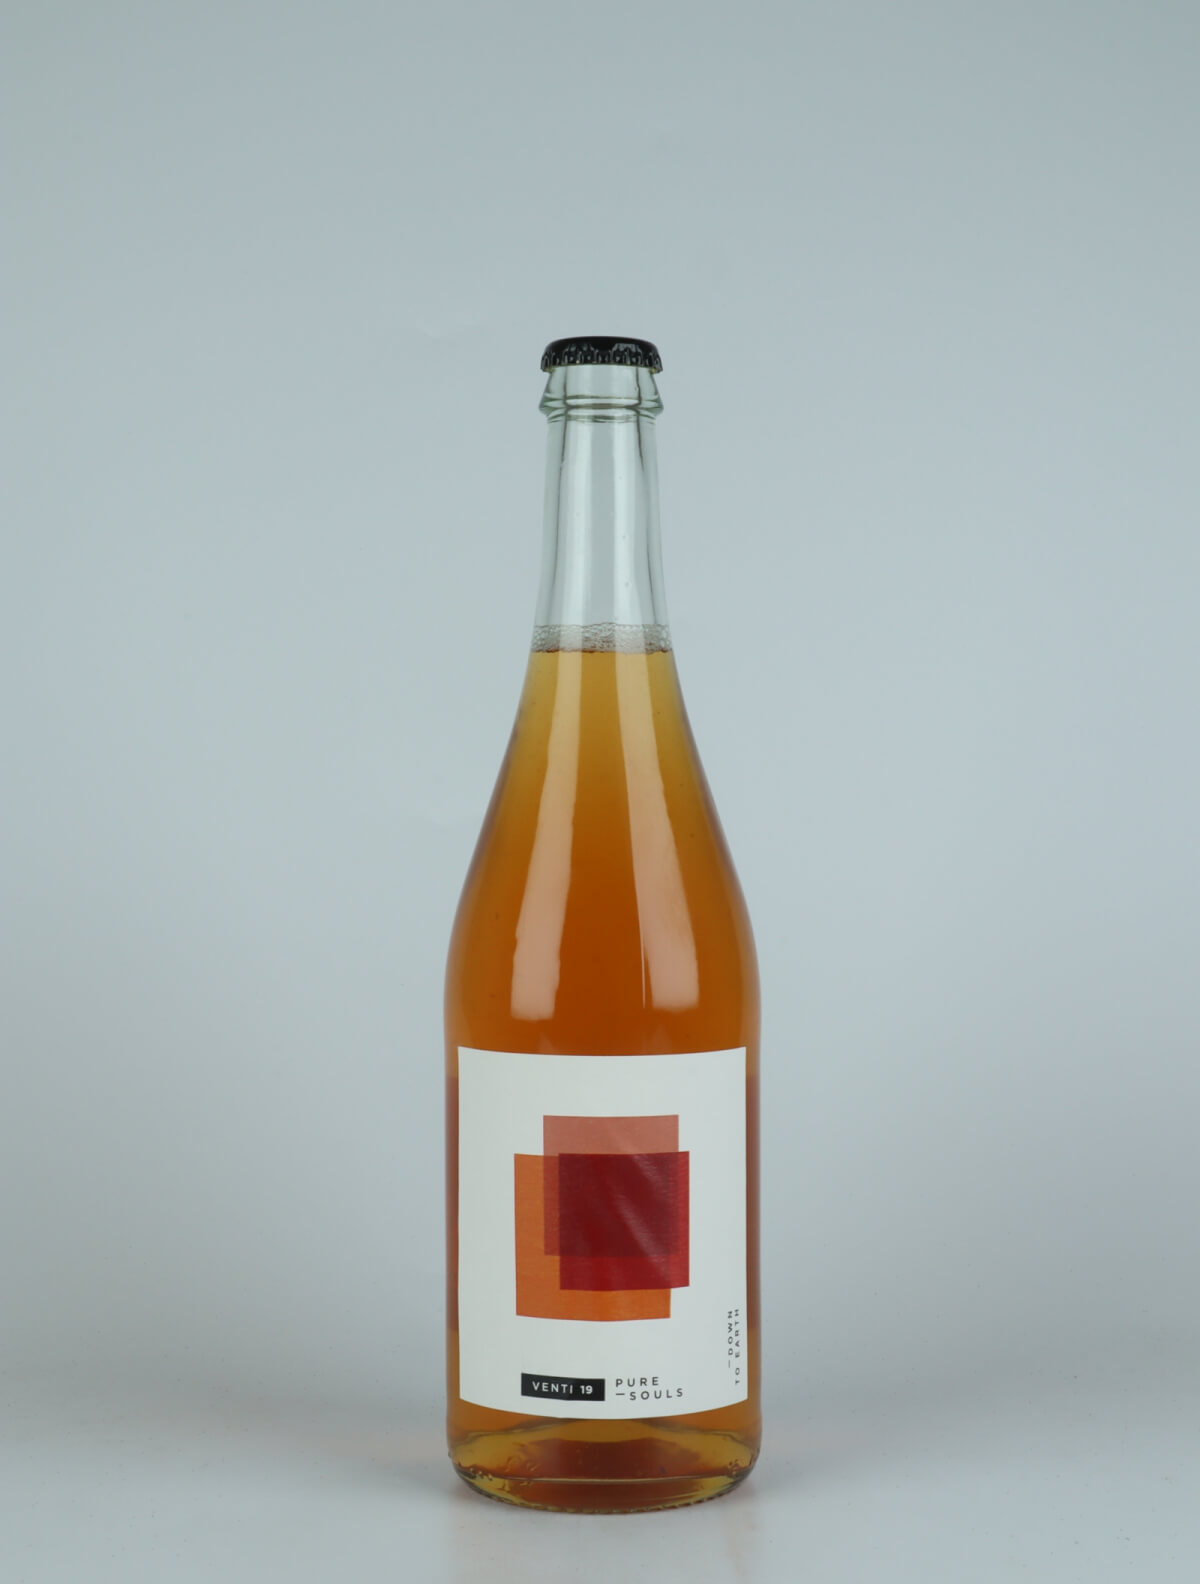 A bottle 2019 Pure Souls Orange wine from do.t.e Vini, Tuscany in Italy